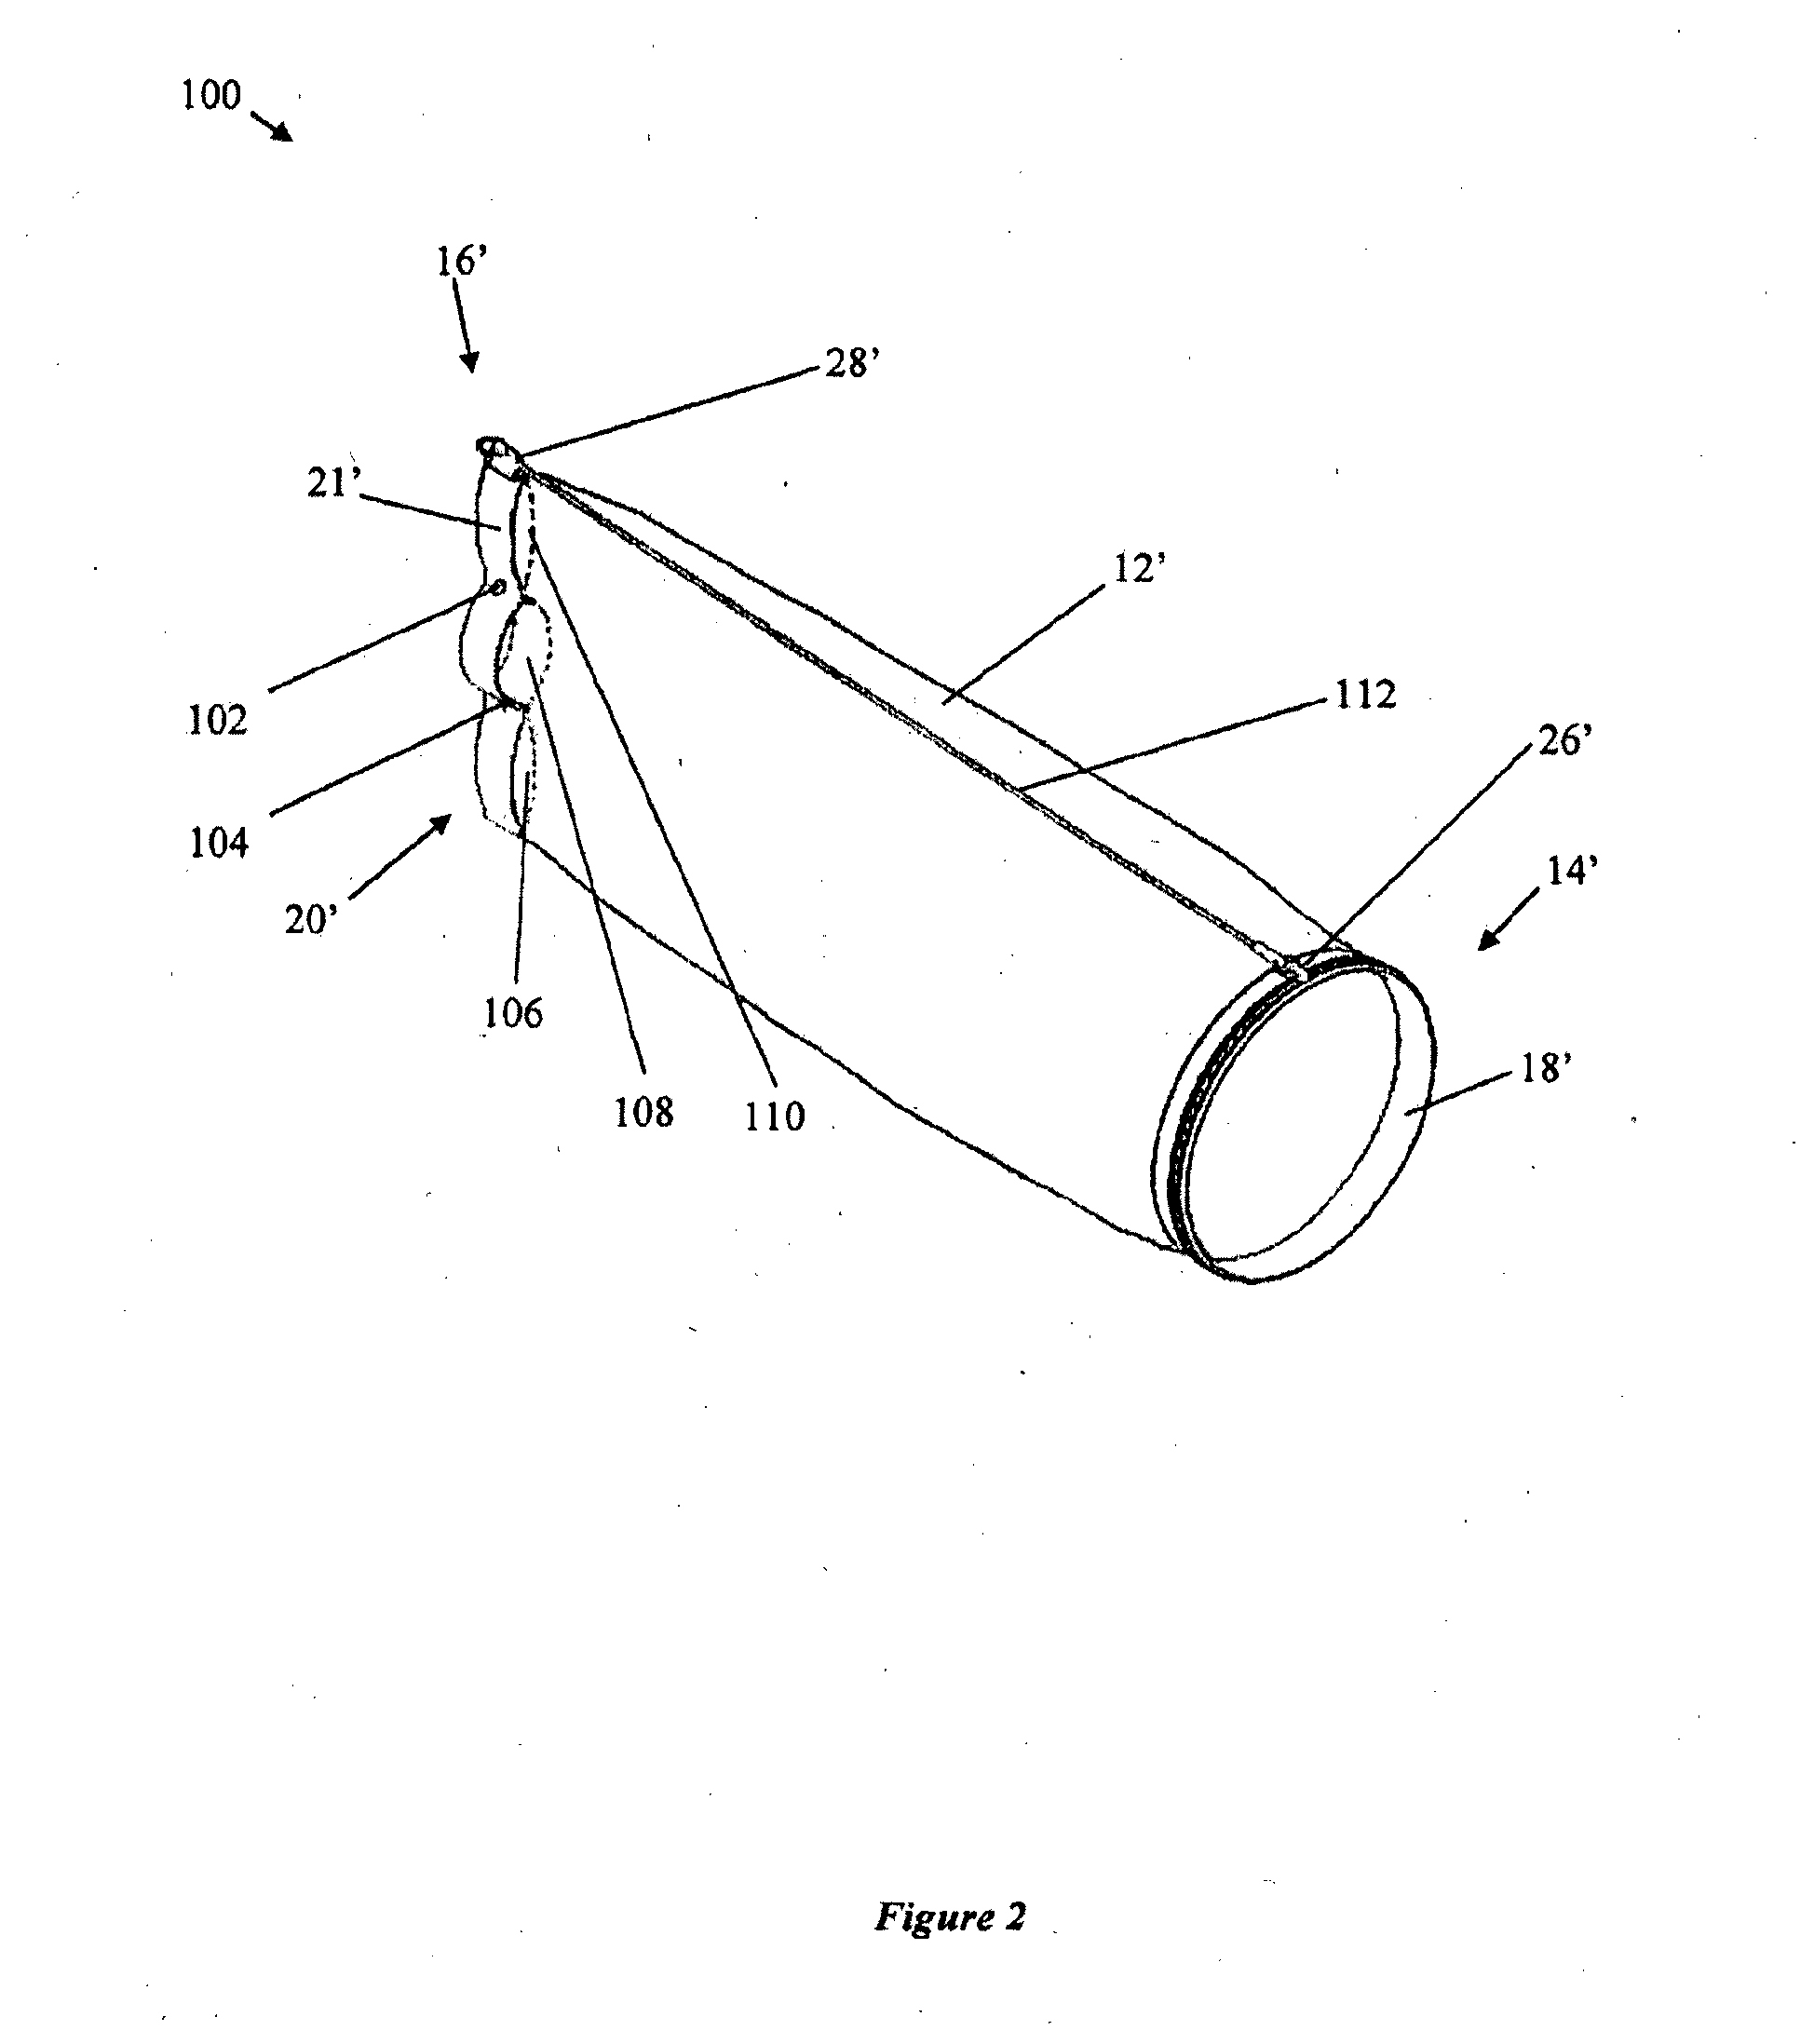 Device for retrieving fish